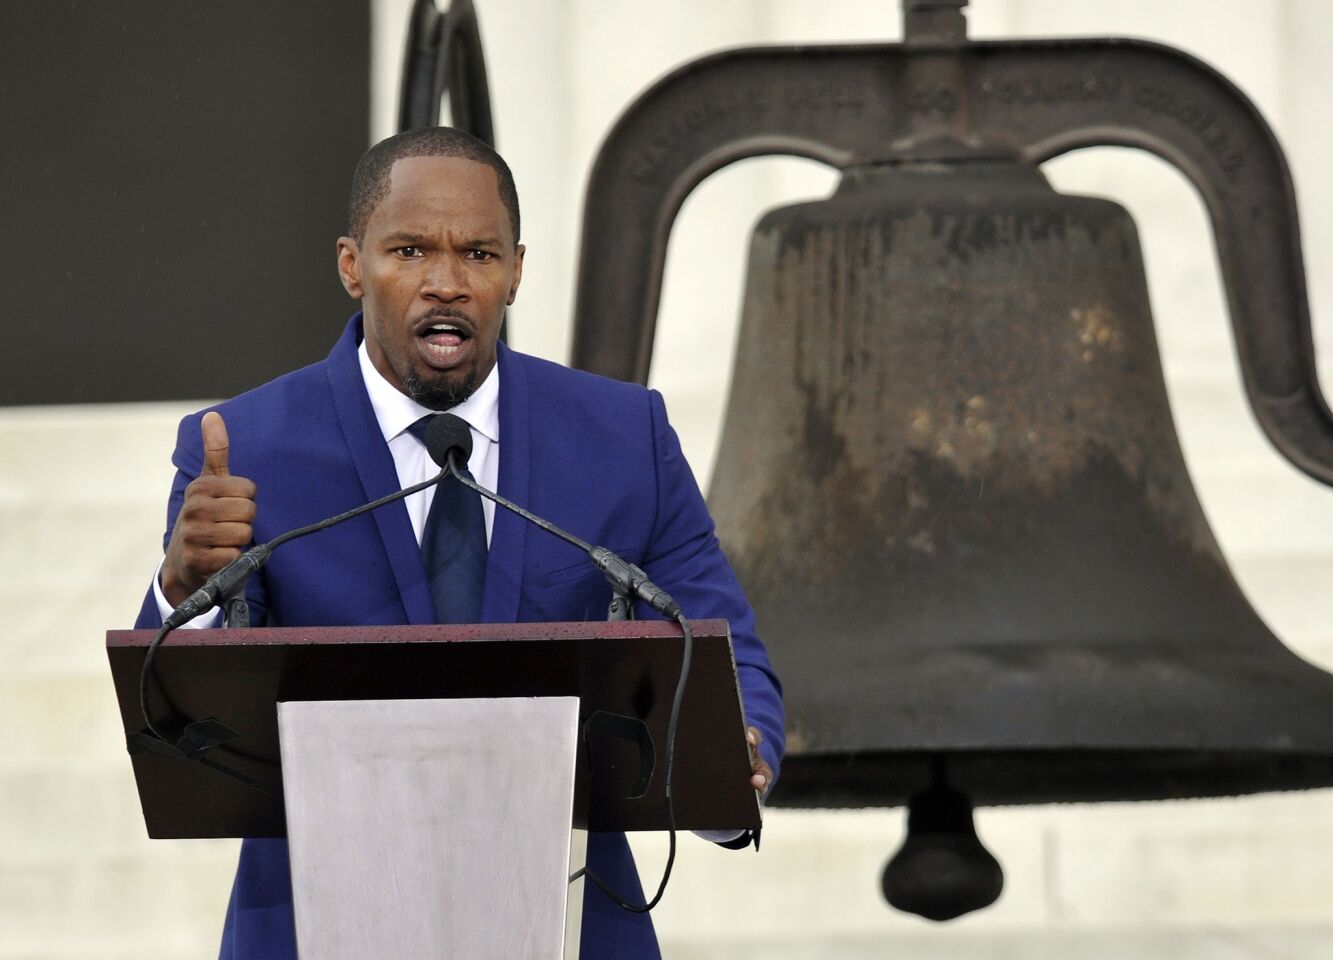 Actor Jamie Foxx speaks during the "Let Freedom Ring Commemoration and Call to Action" to commemorate the March on Washington.